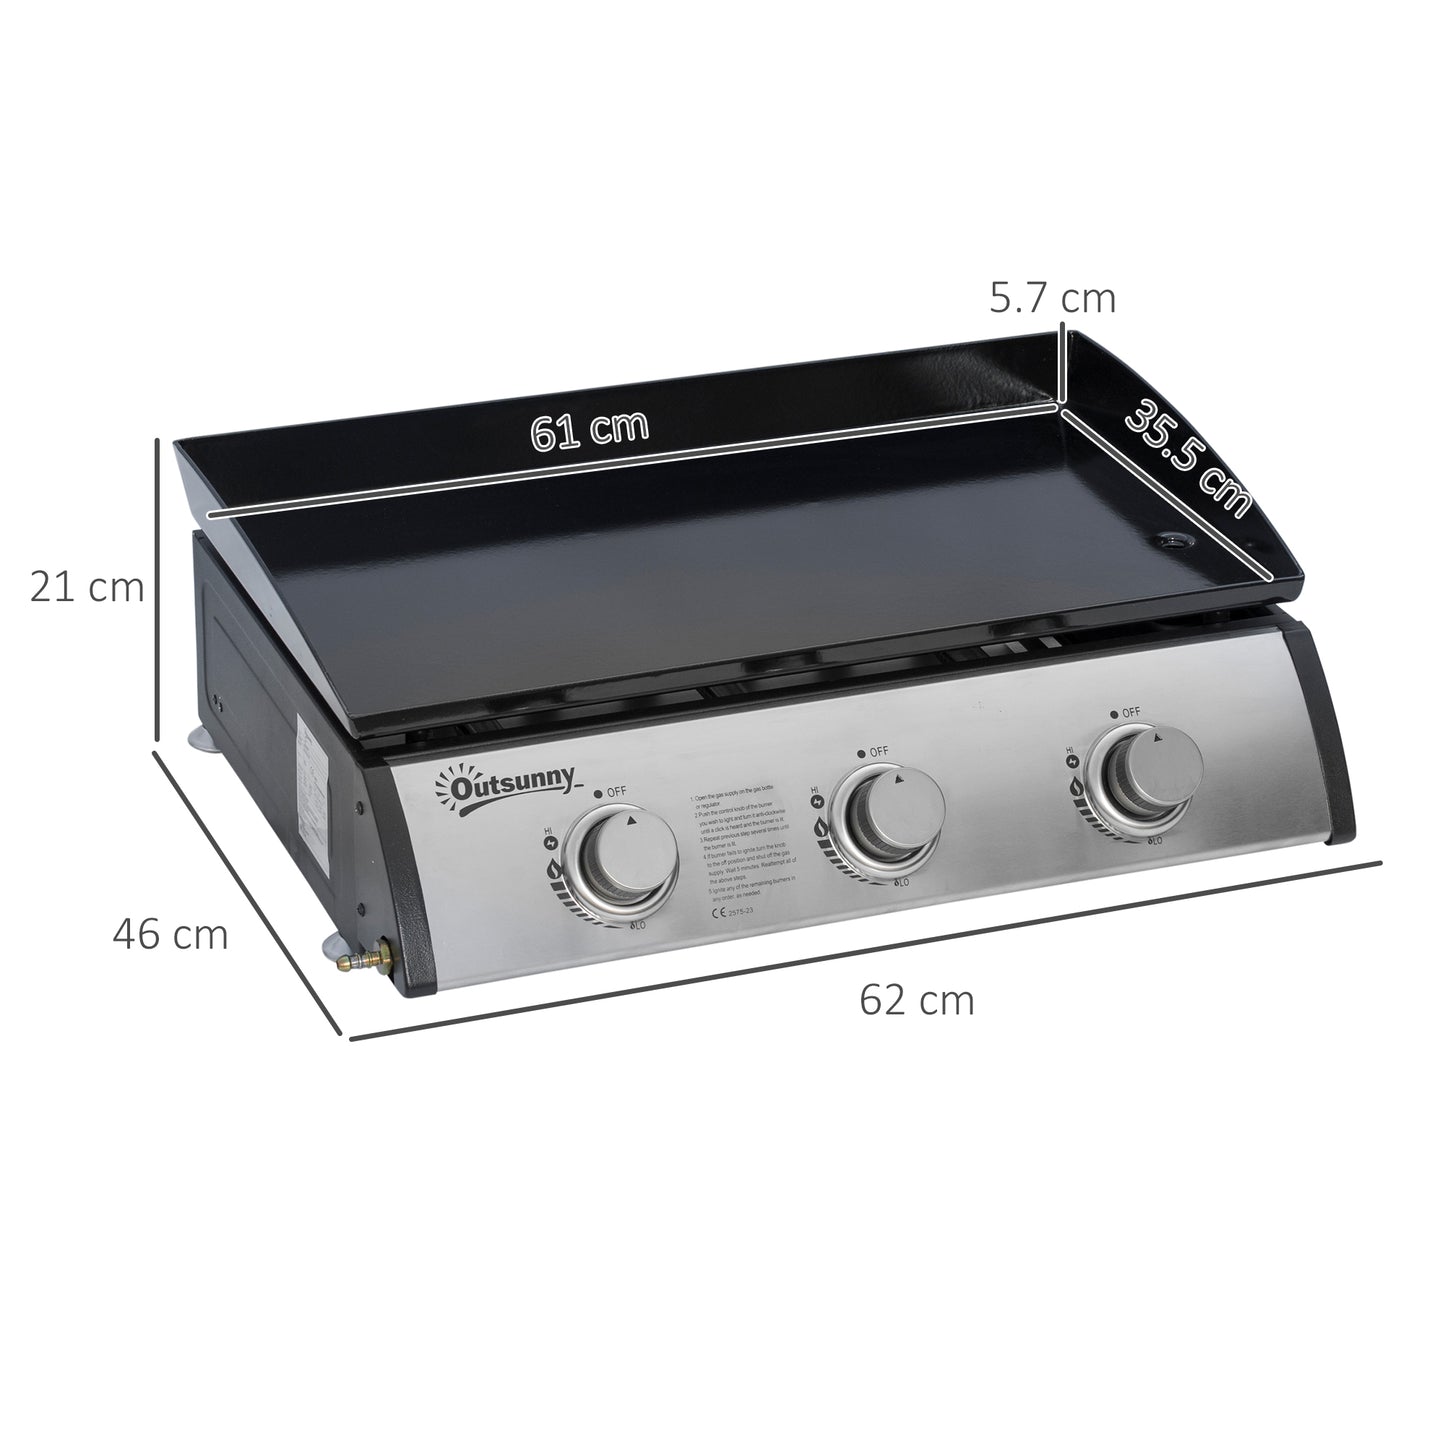 Outsunny Gas Plancha Grill with 3 Stainless Steel Burner, 9kW, Portable Tabletop Gas BBQ w/Non-Stick Griddle for Camping Picnic Garden Party Festival